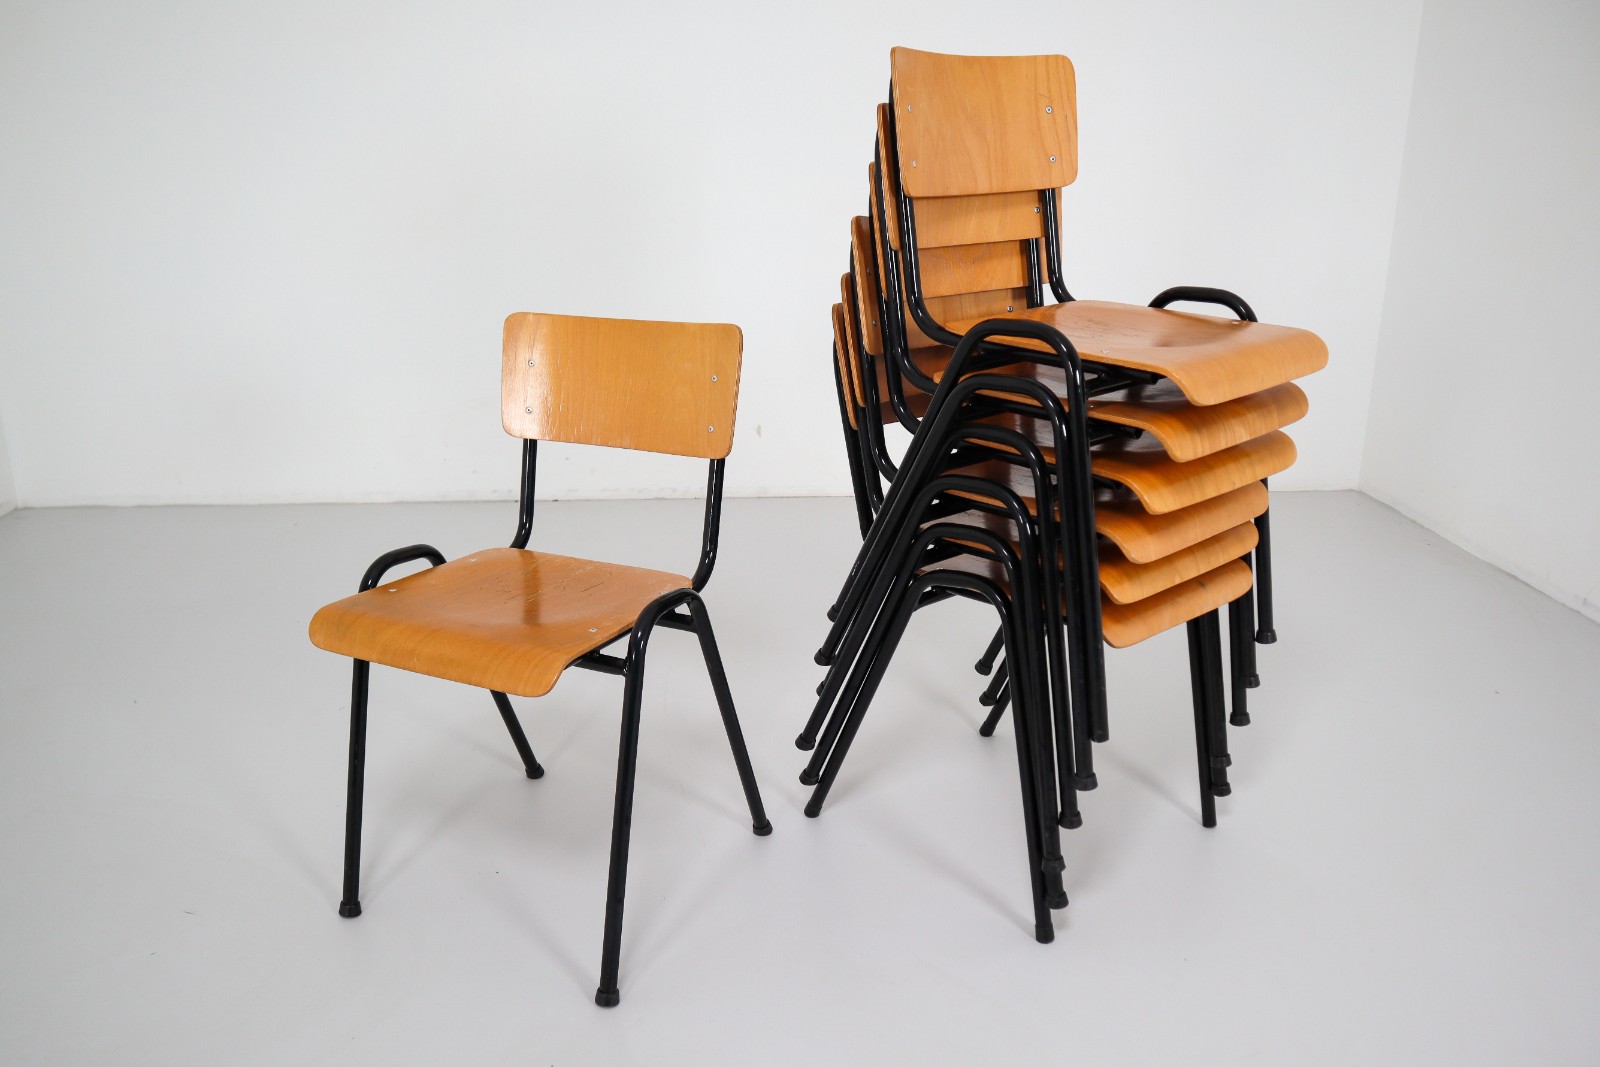 150 X Dutch Schoolchairs Beech And Black Frame 1960s Mid 20th